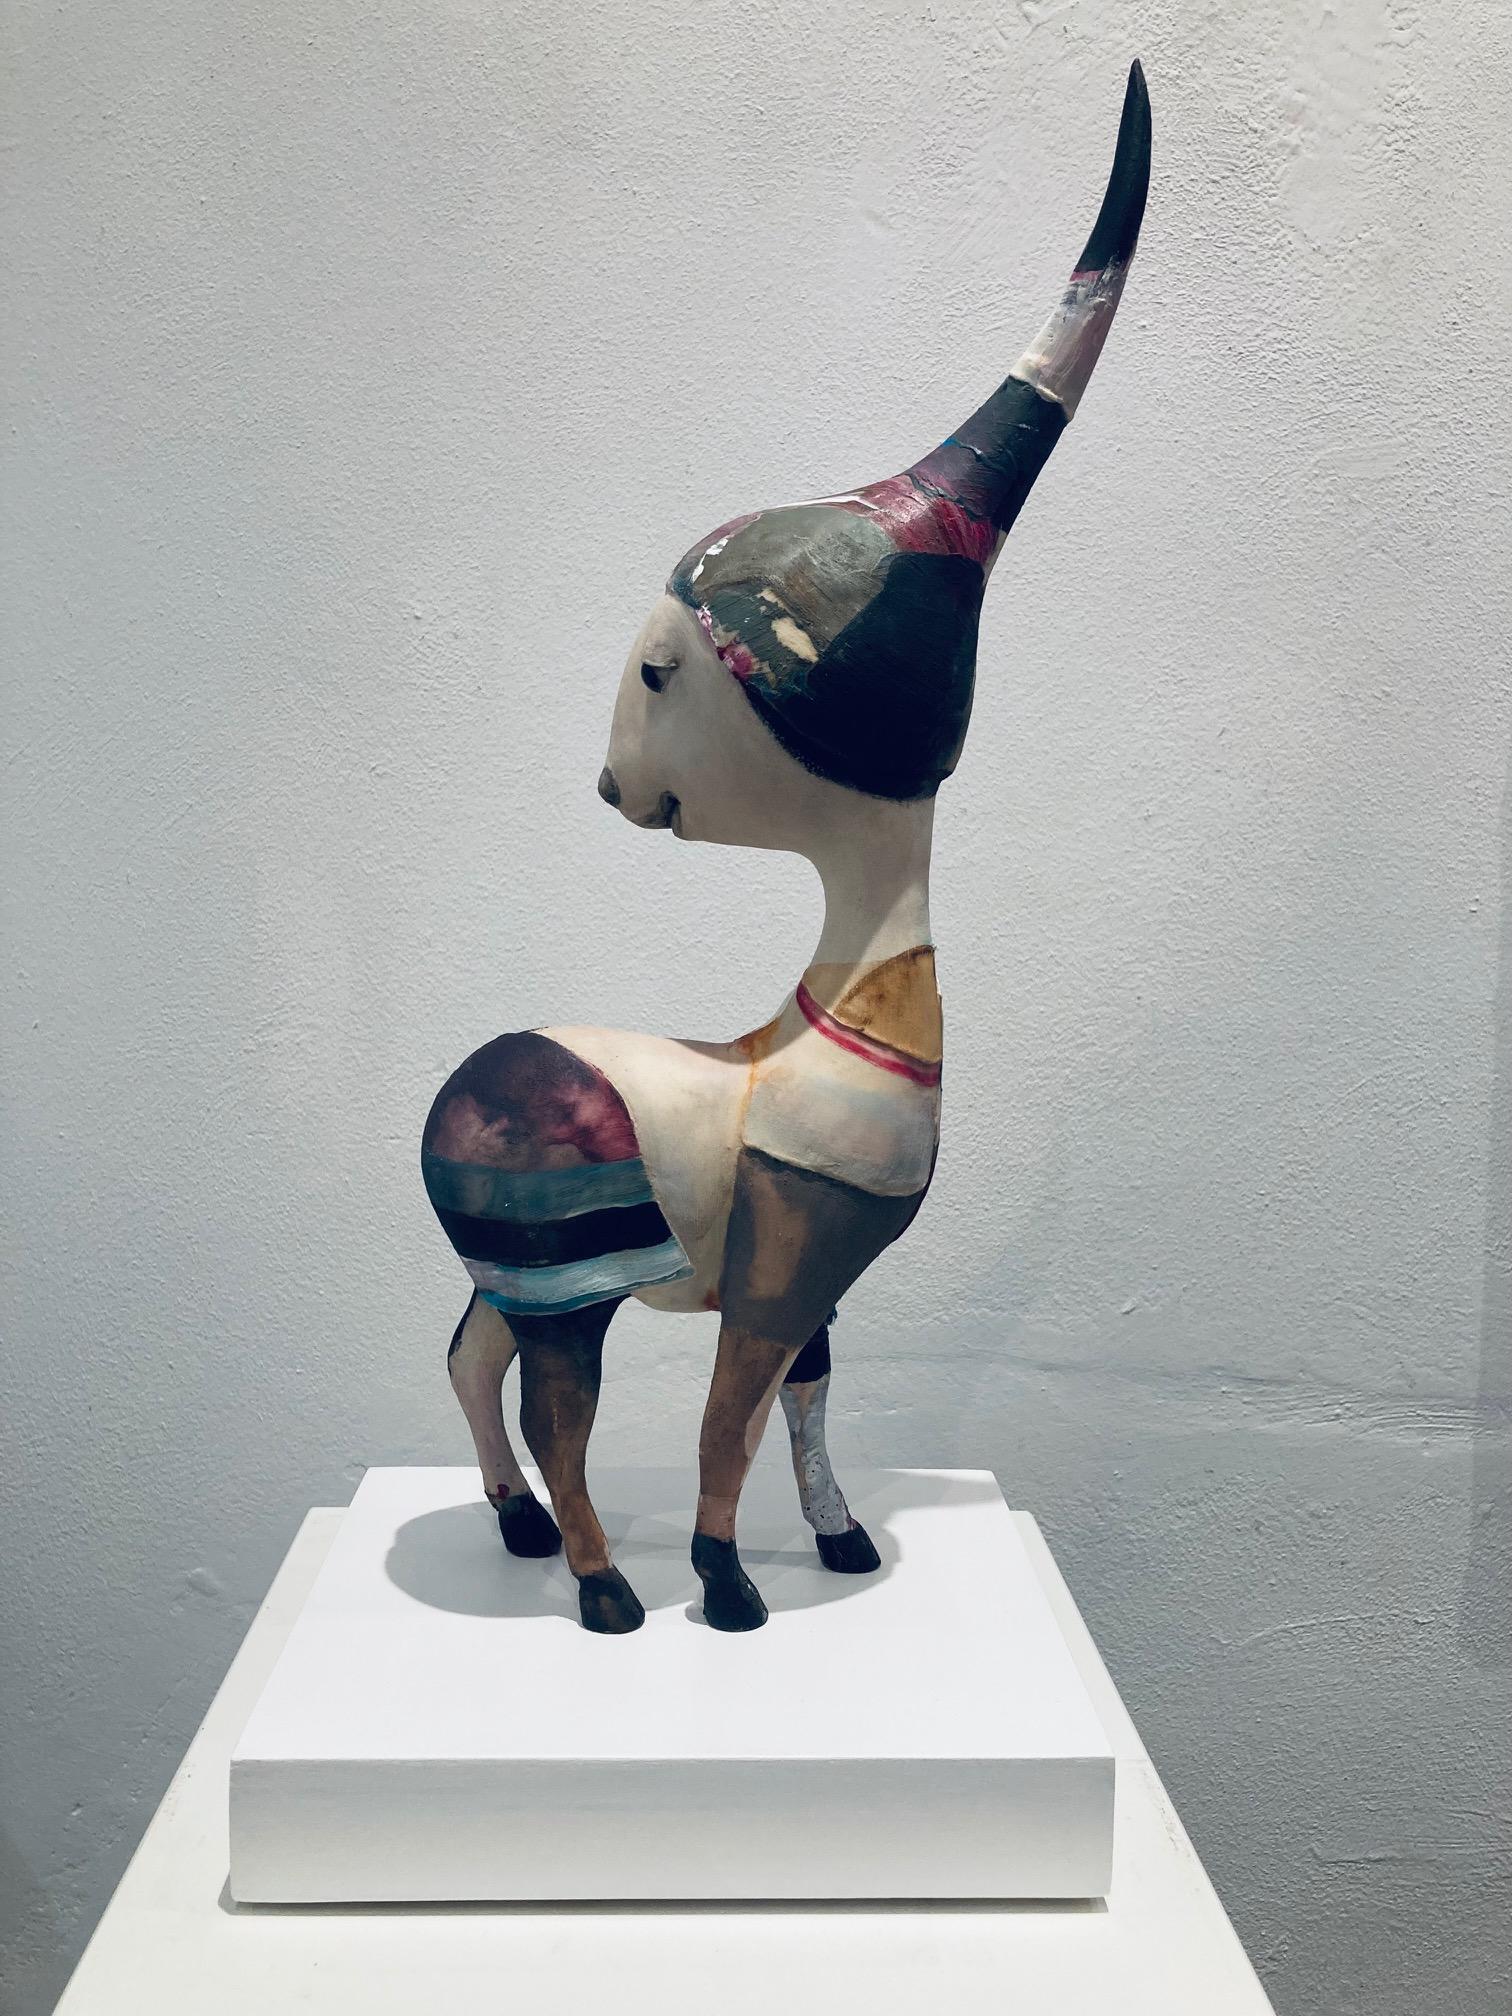 Paar Pair Mixed Media Sculpture Surreel Animal Bird Dog In Stock 
Corjan Nodelijk is a composer and a professional storyteller. The quirky and surreal creatures - mostly people or animals - seem curious. But it is ultimately up to the viewer to have